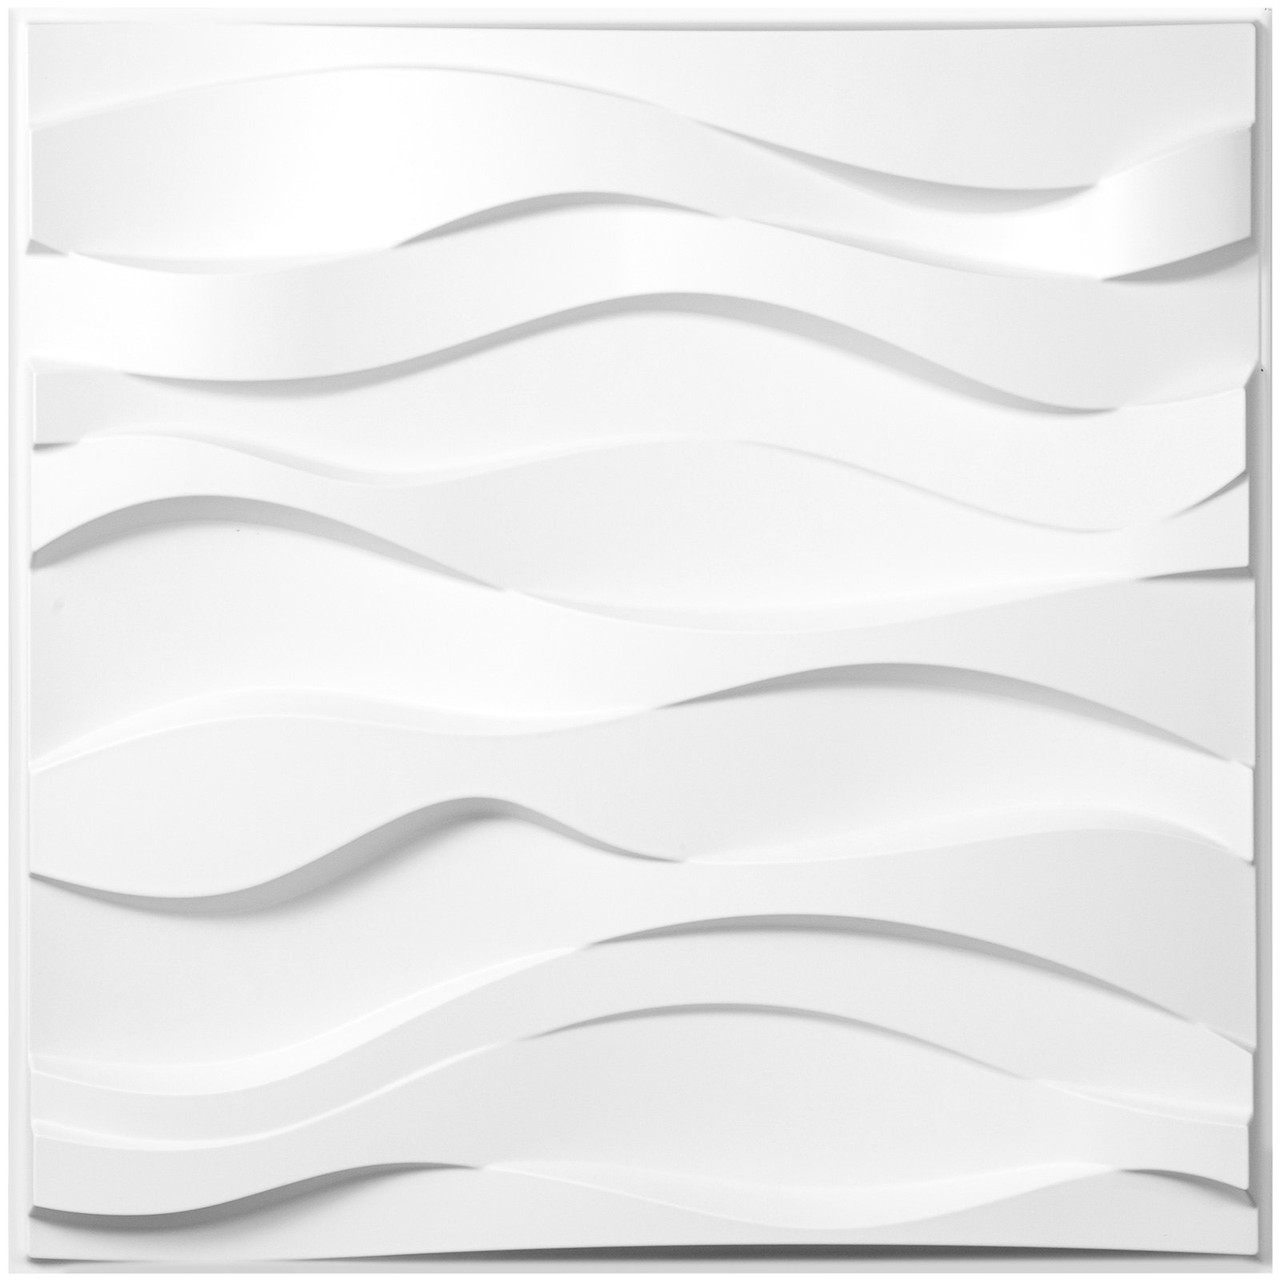 3D Wall Panels 13 Pack Wall Panels PVC Decorative Wall Panels for 32 sqft Area Wall Panels for Interior Wall Decor Big Wave Style 3D Wall Tiles White 3D Wall Art Paintable Modern Wall Panel